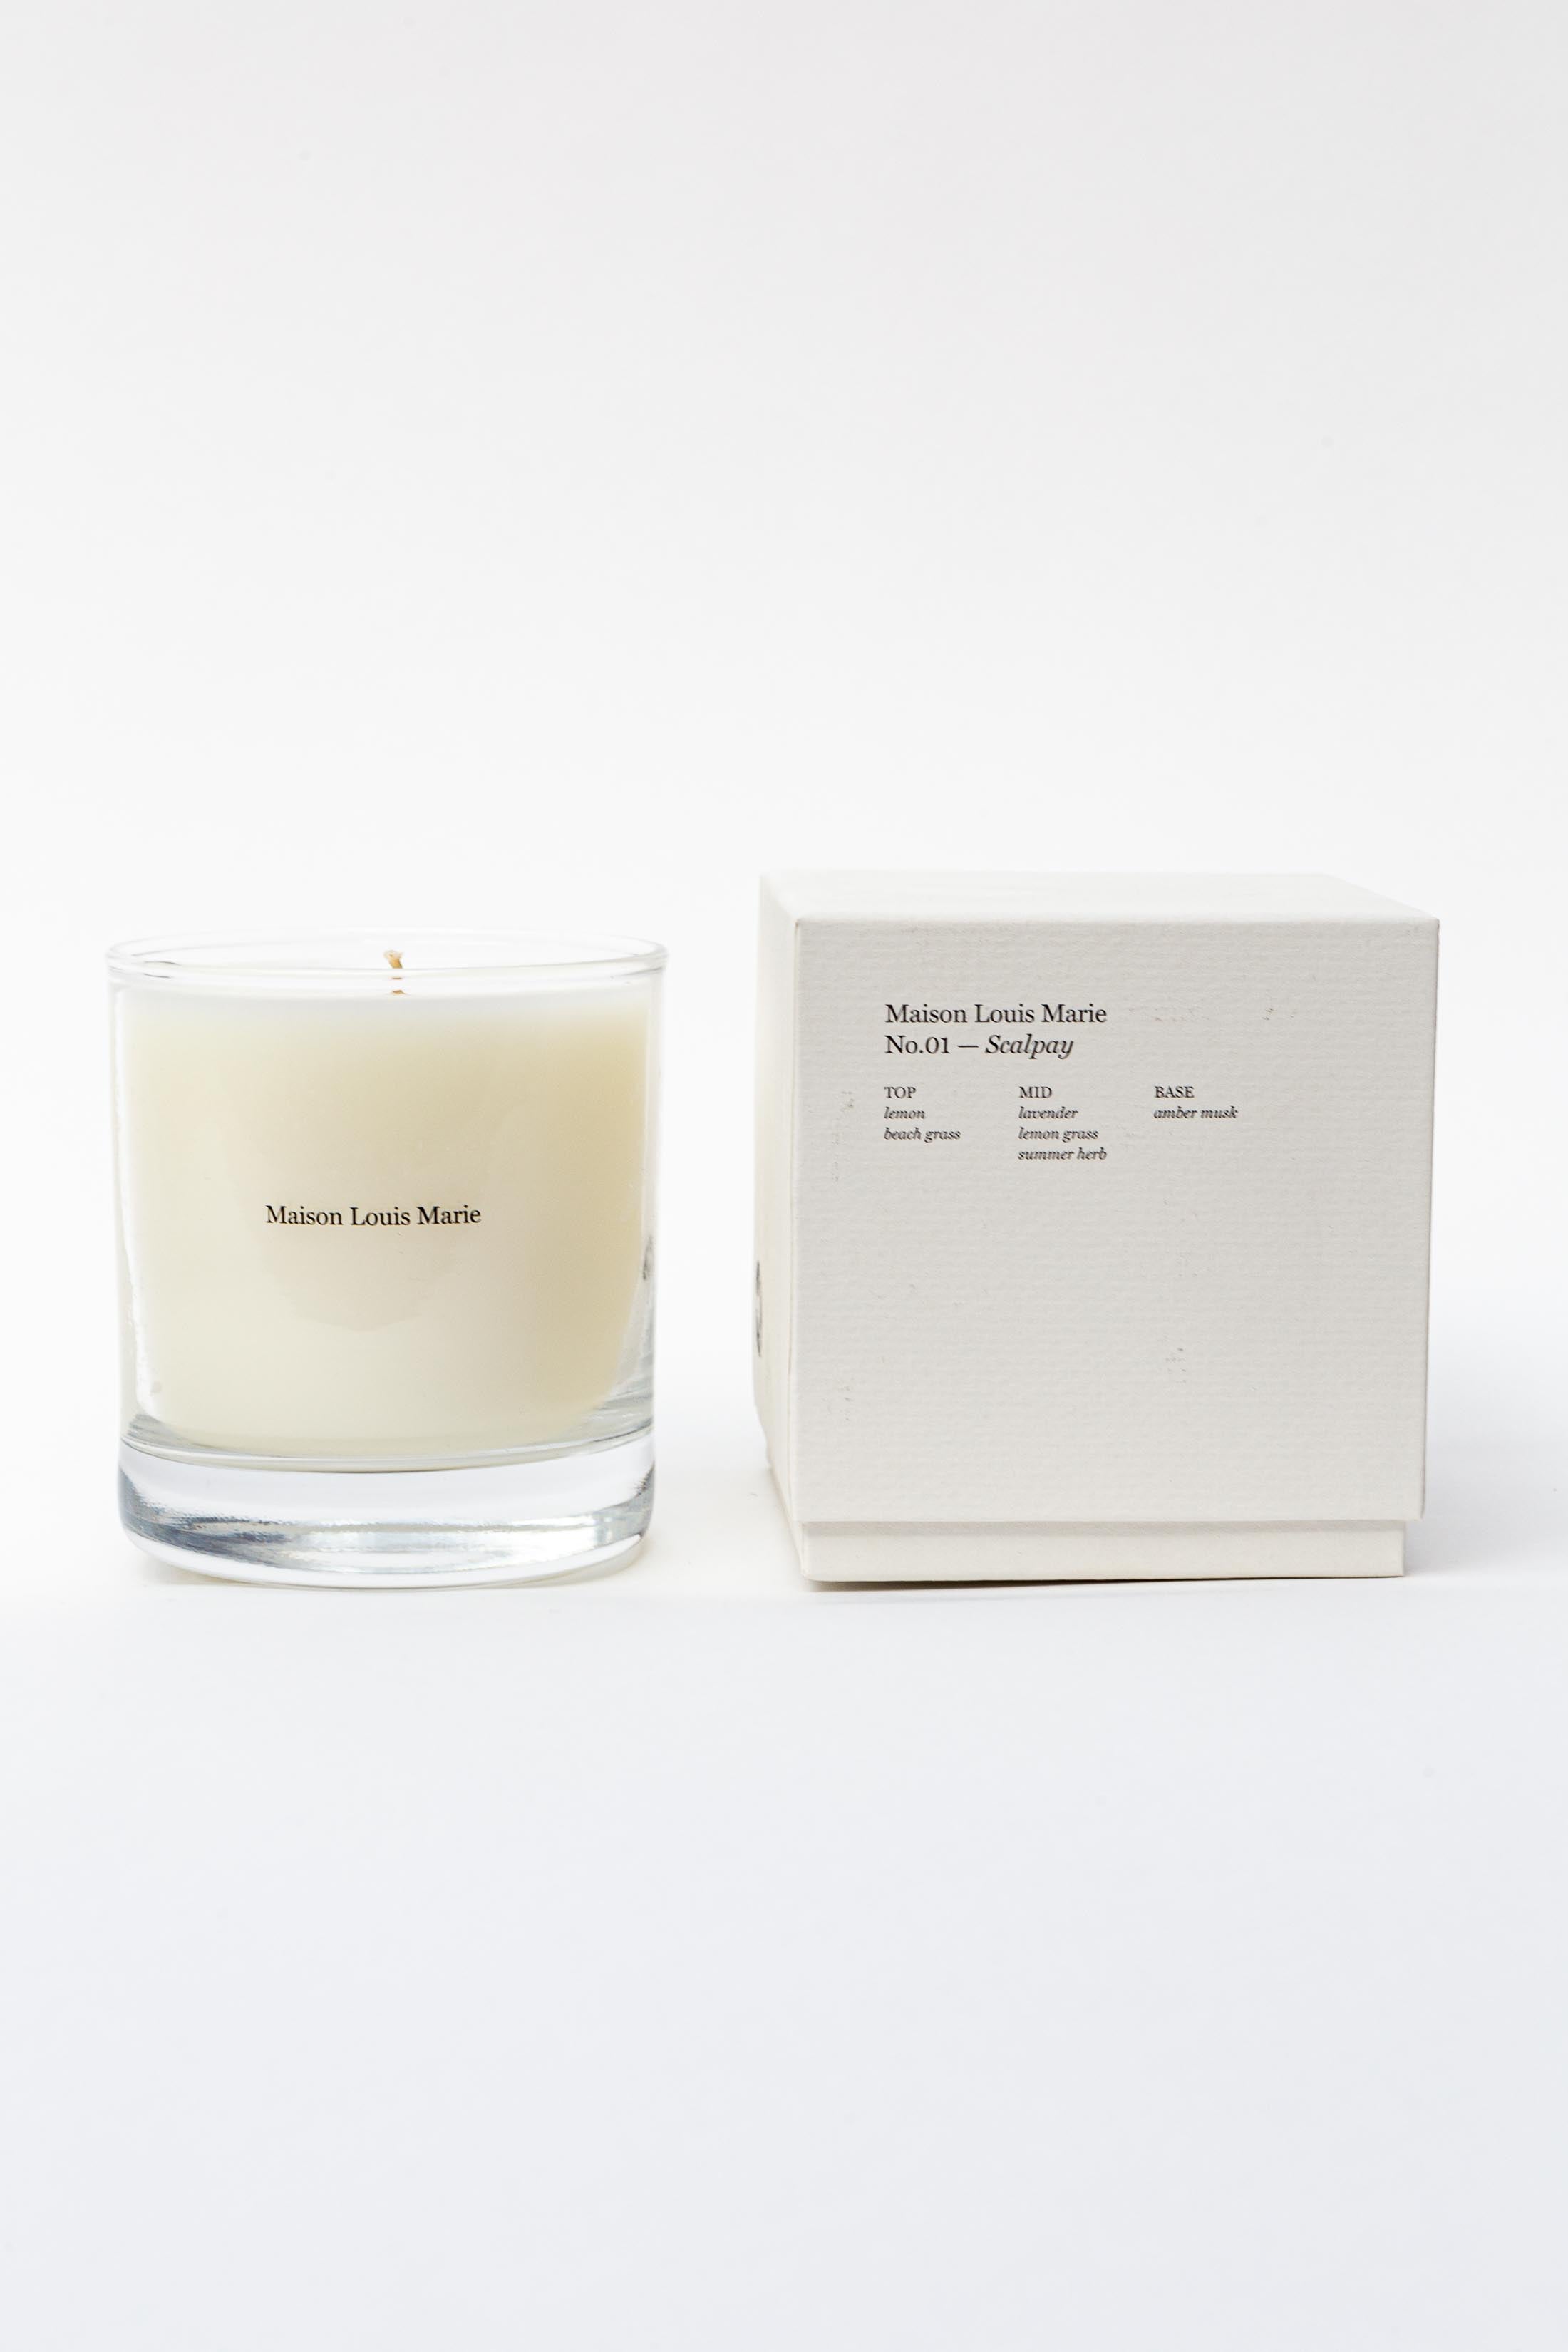 SCALPAY No. 1 Candle - Intentionally Blank